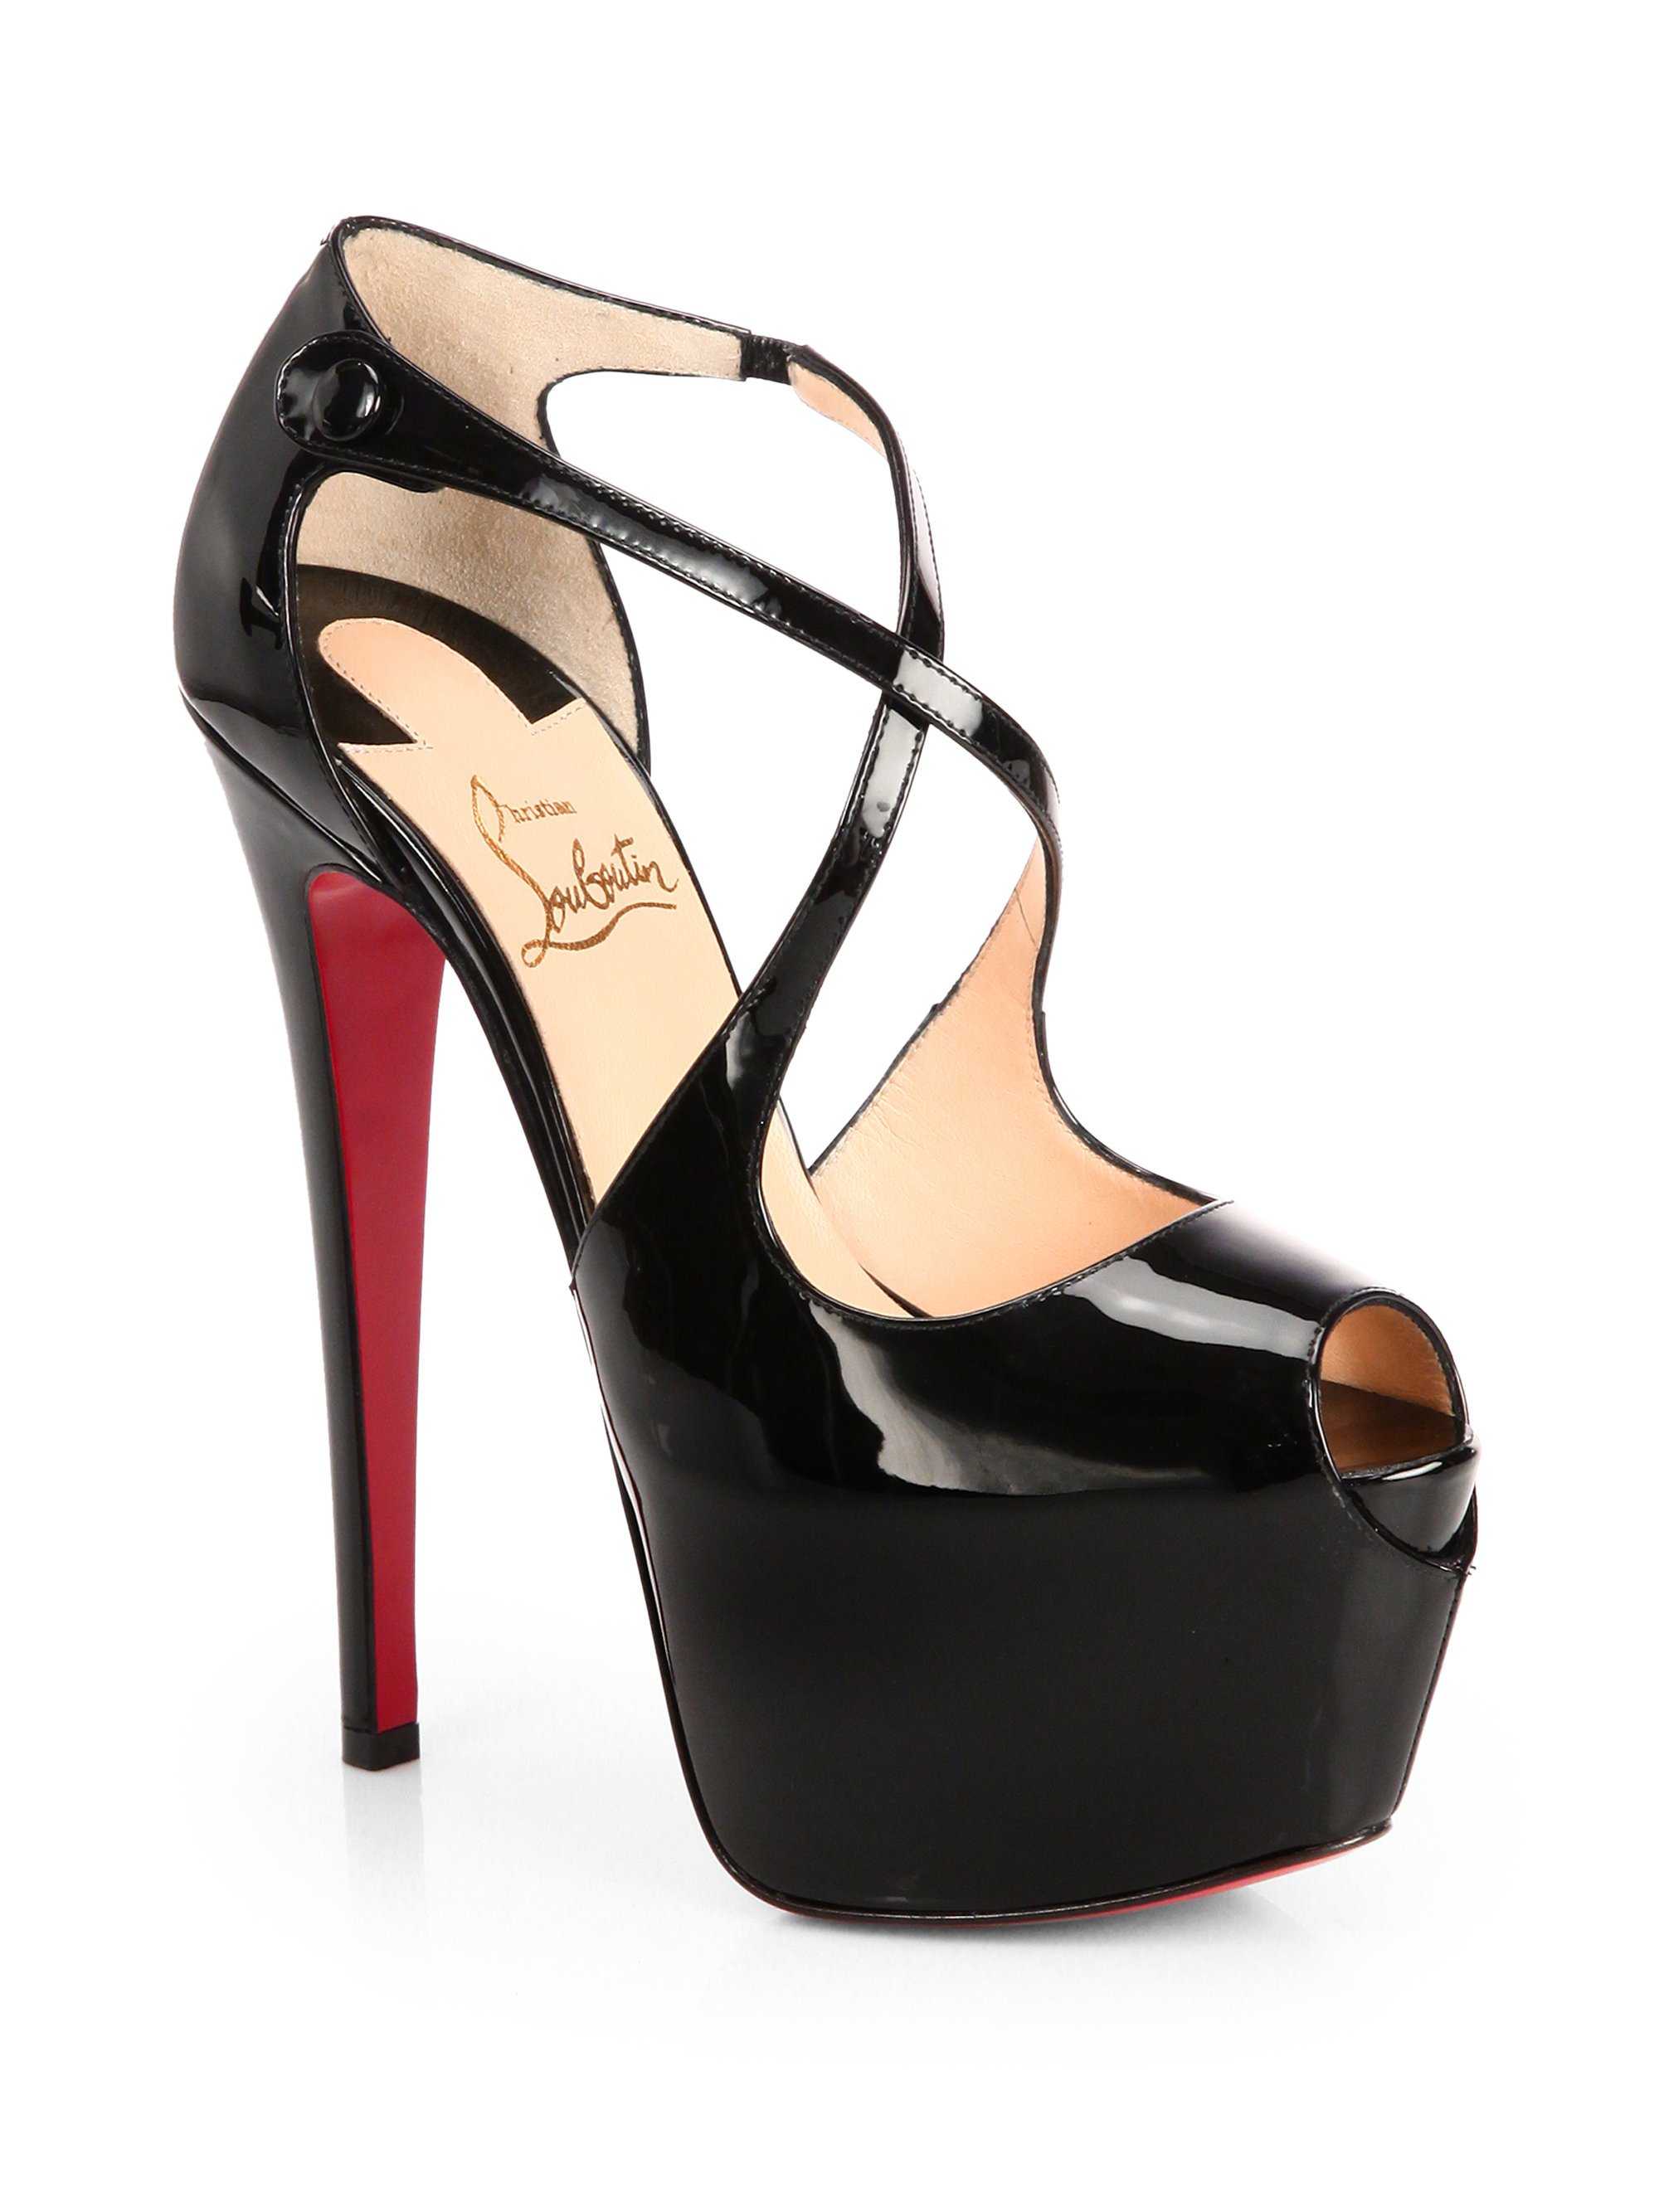 Black Louboutins Shoes / Lyst - Christian Louboutin So Kate 120 Suede ...